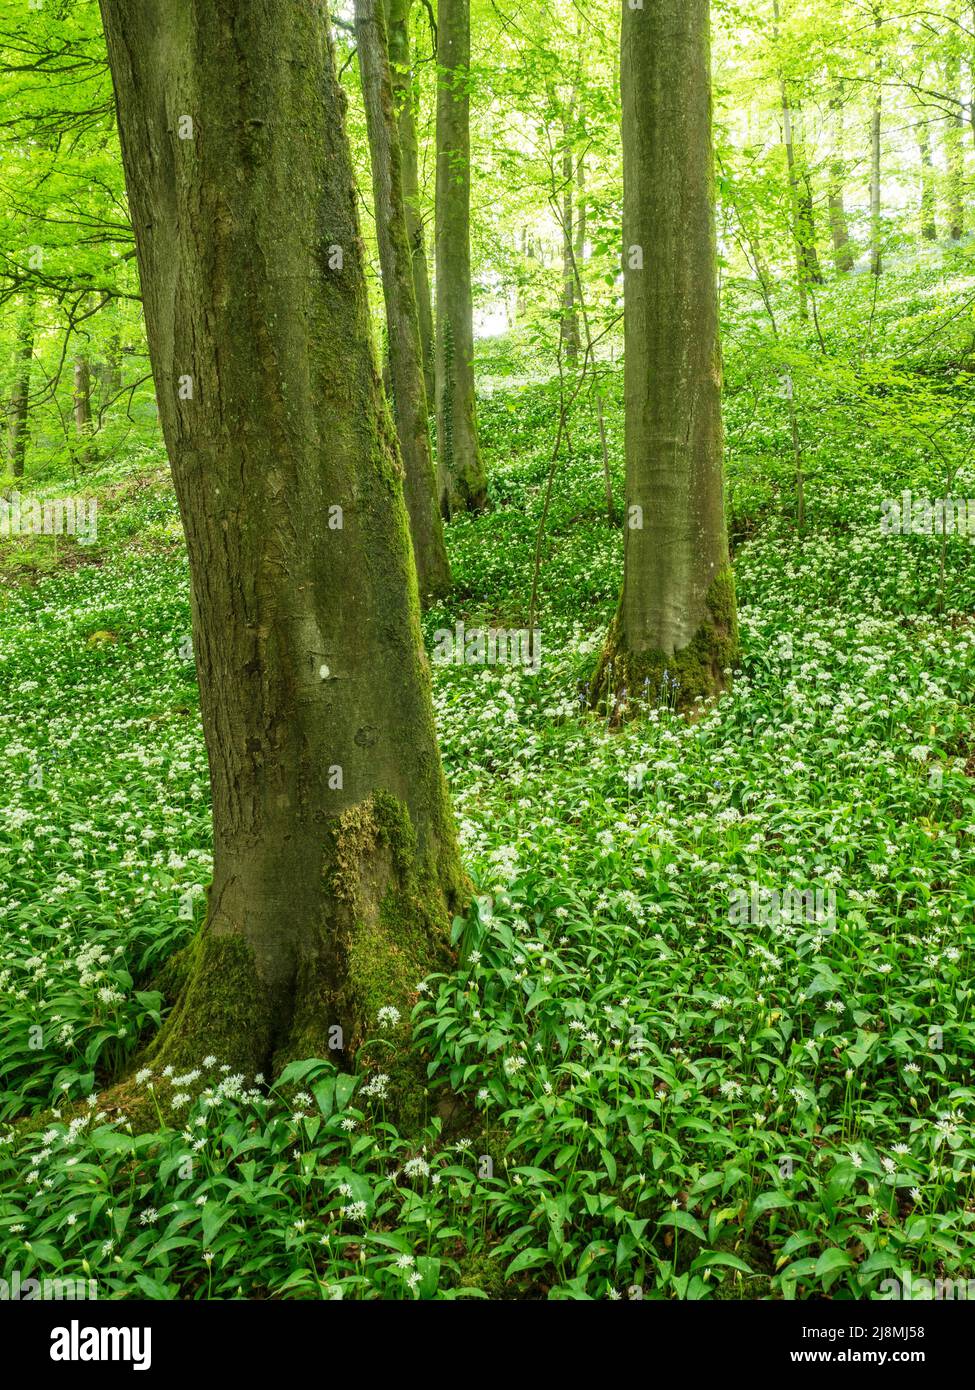 Wild garlic in flower under beech trees in Strid Wood Bolton Abbey North Yorkshire England Stock Photo